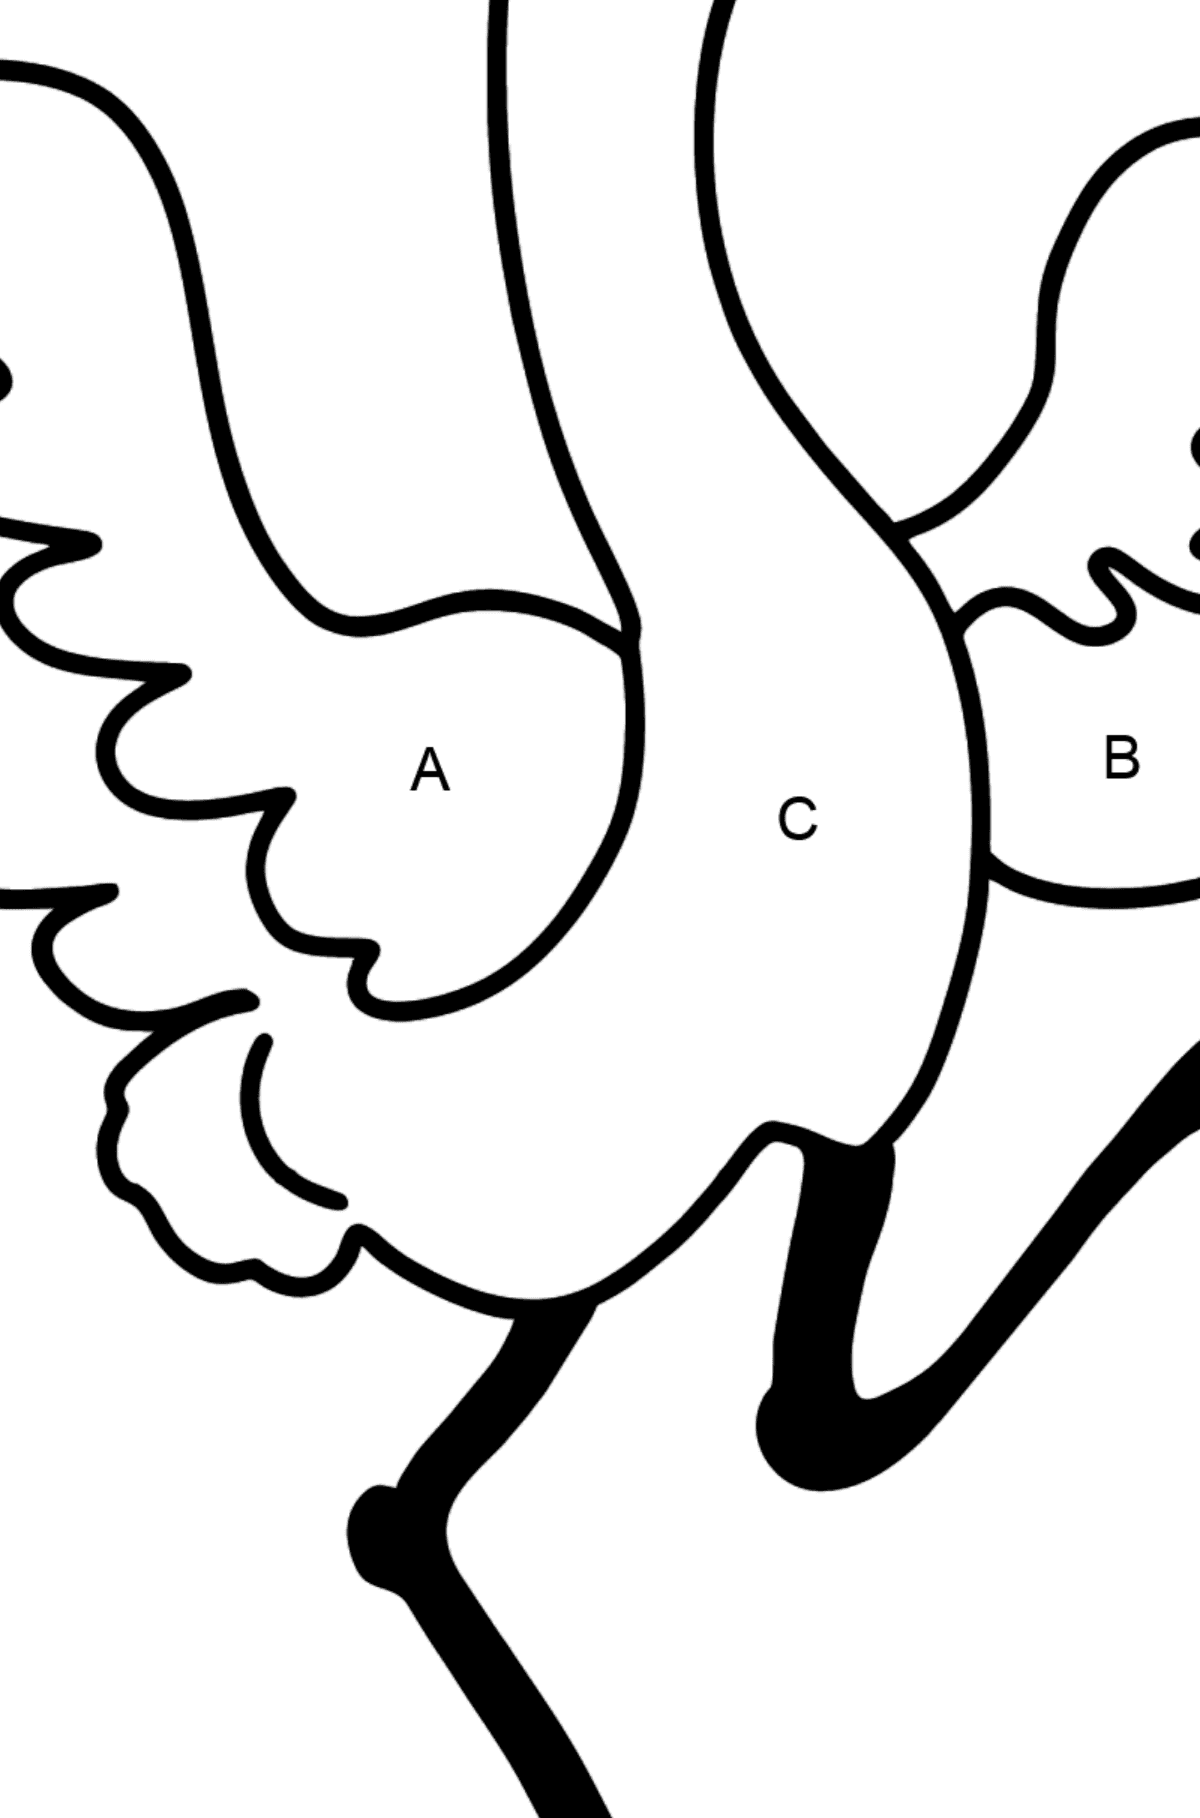 Crane coloring page - Coloring by Letters for Kids